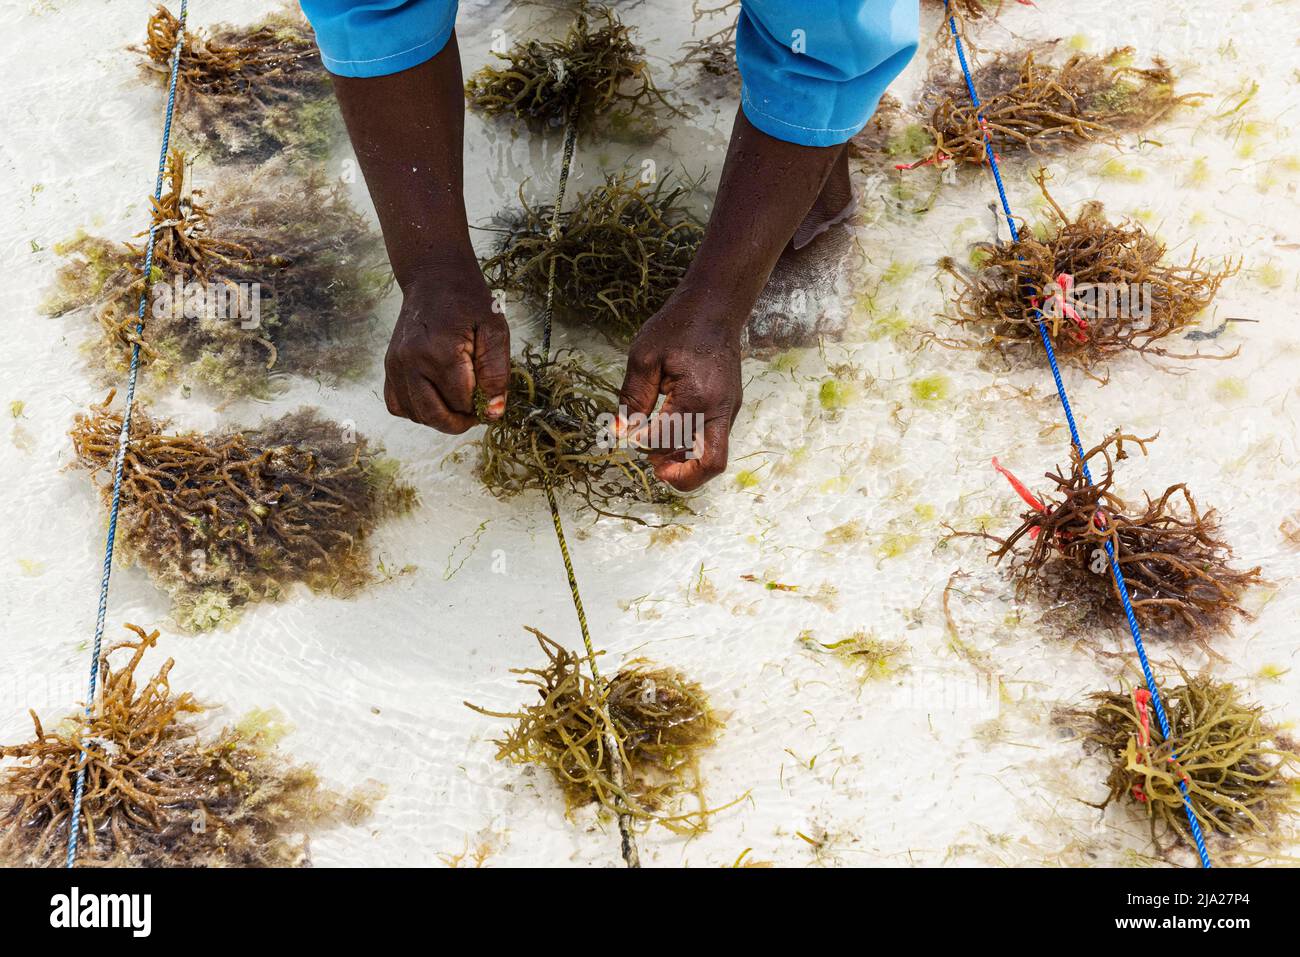 Hands tying red algae (Rhodophyta) to string, plantation, Seaweed centre, Women's Cooperative, seaweed cultivation and soap production, Paje, East Stock Photo